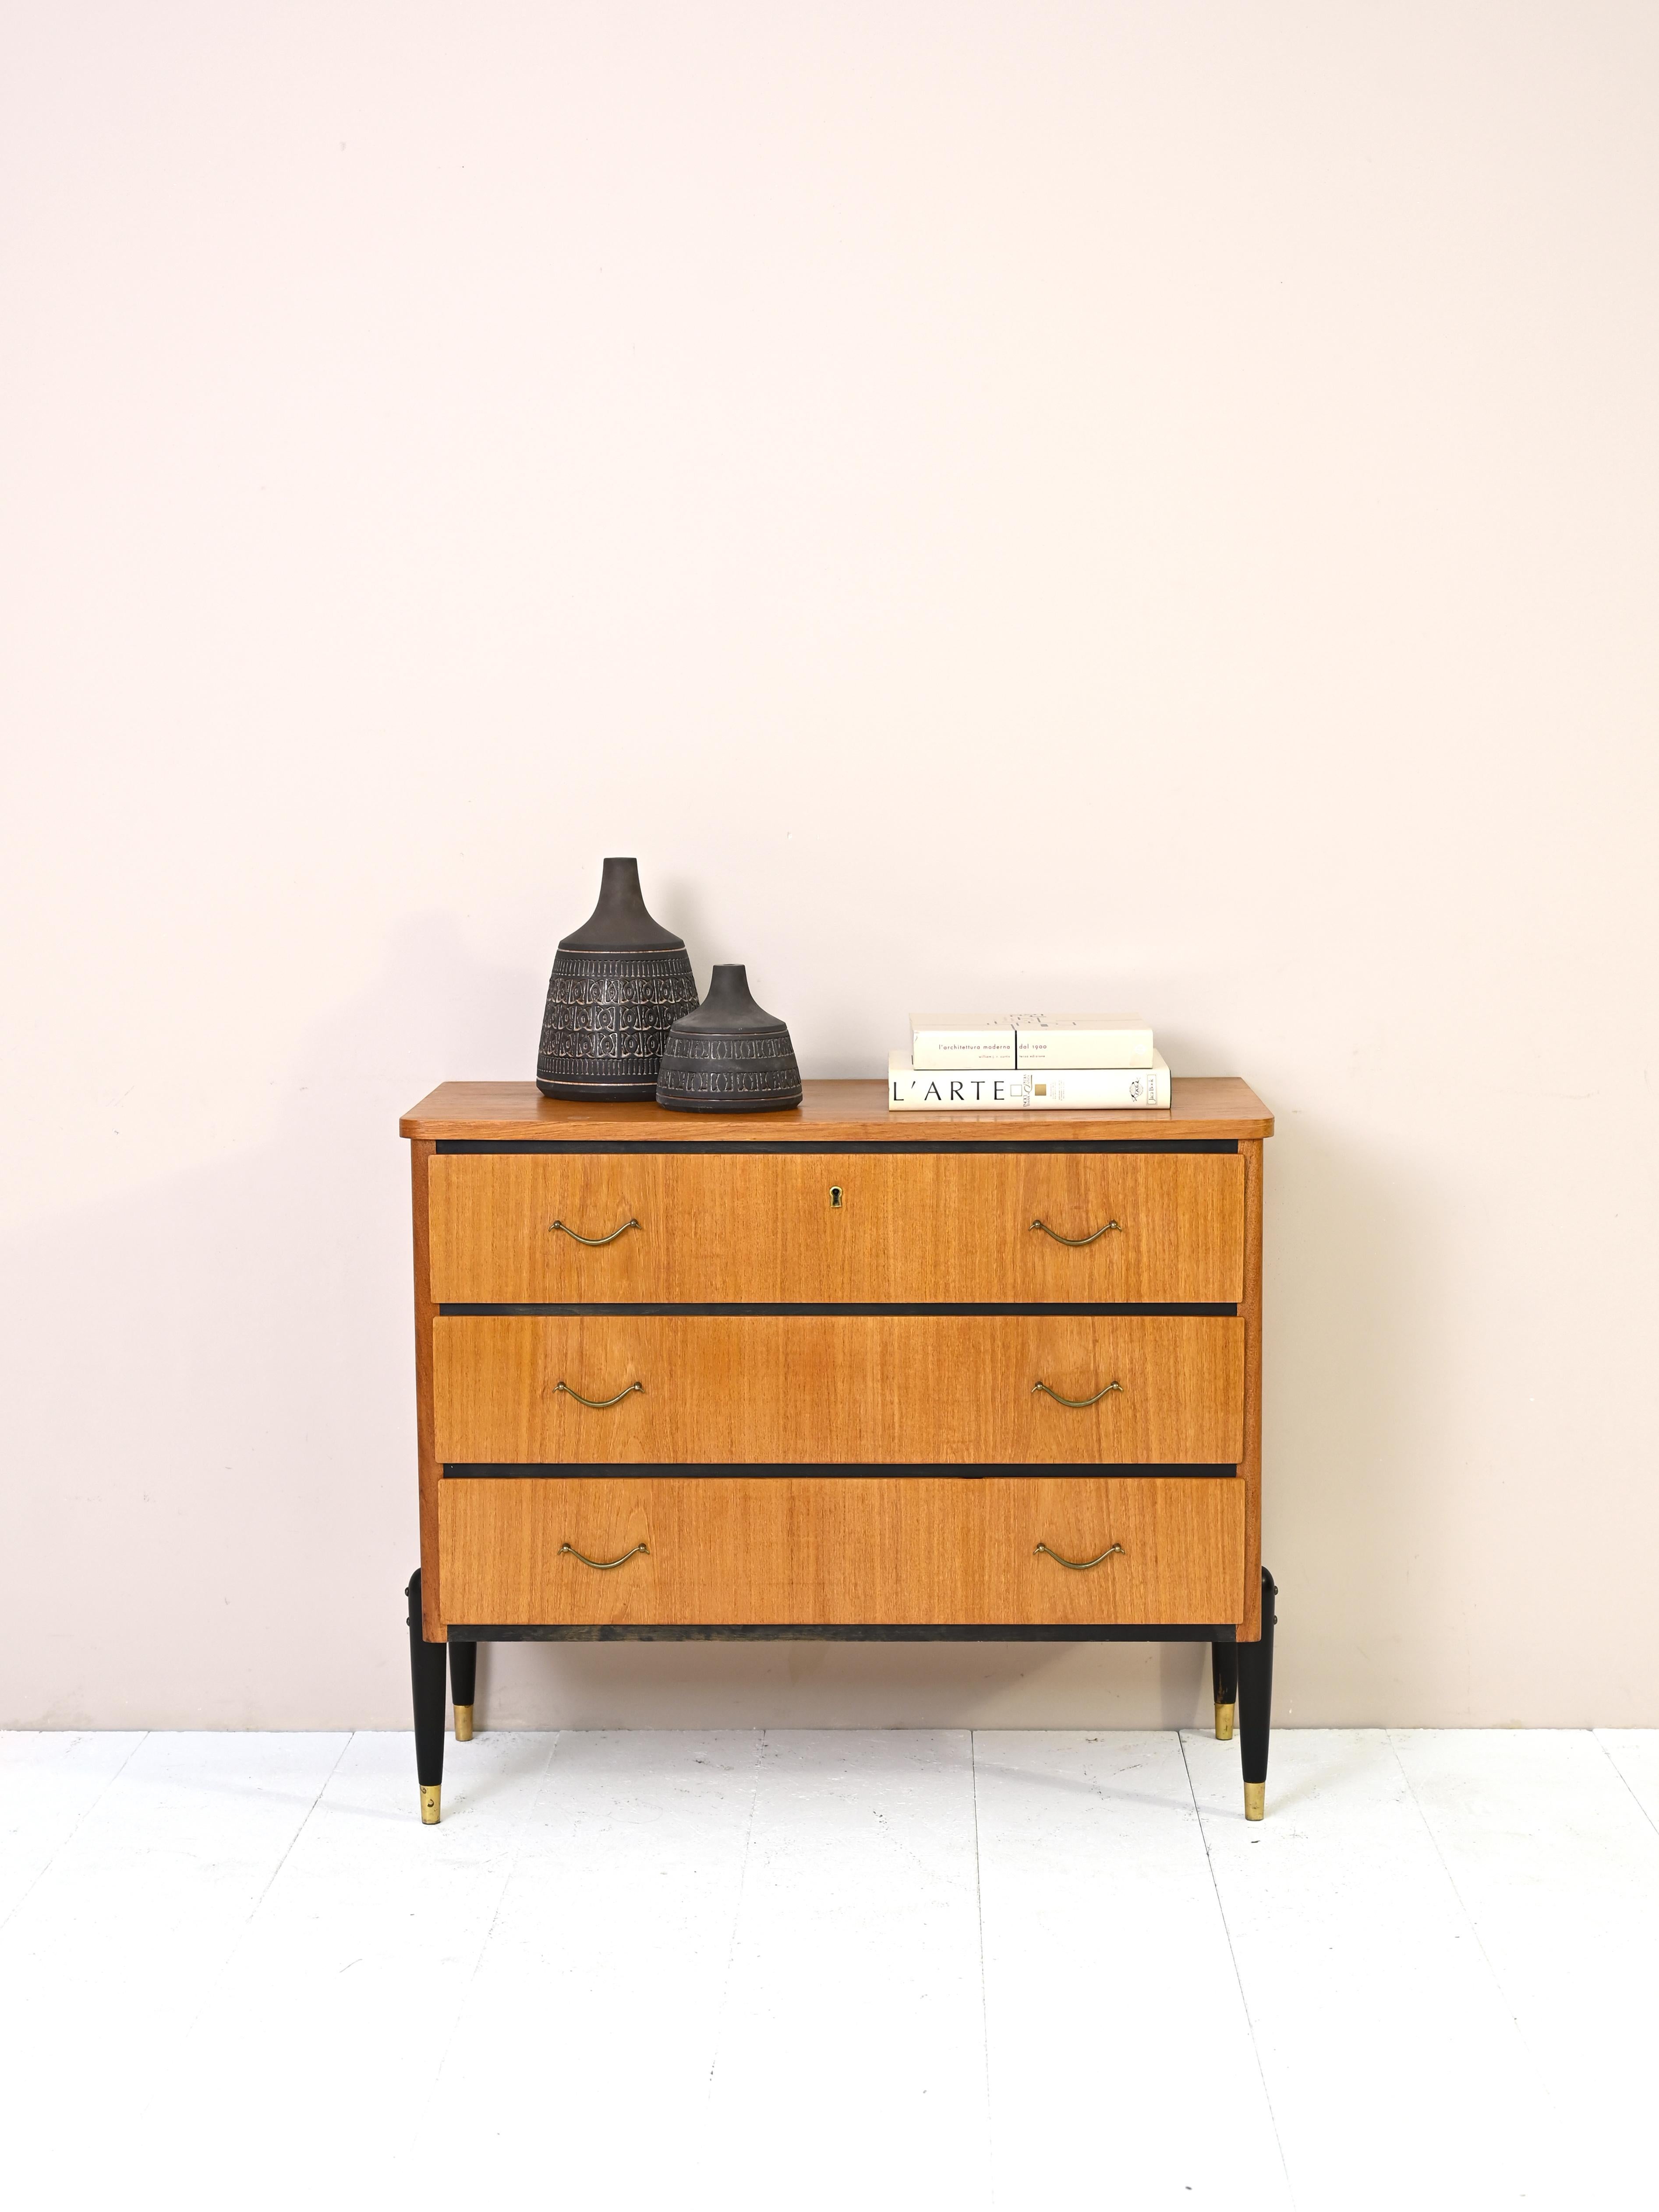 Teak cabinet with 3 drawers produced in the 1960s.
Consisting of a teak wood frame and enriched with metal elements, used for the
handles of the drawers and for the toe of the legs.
The details of the black-painted wood give uniqueness and